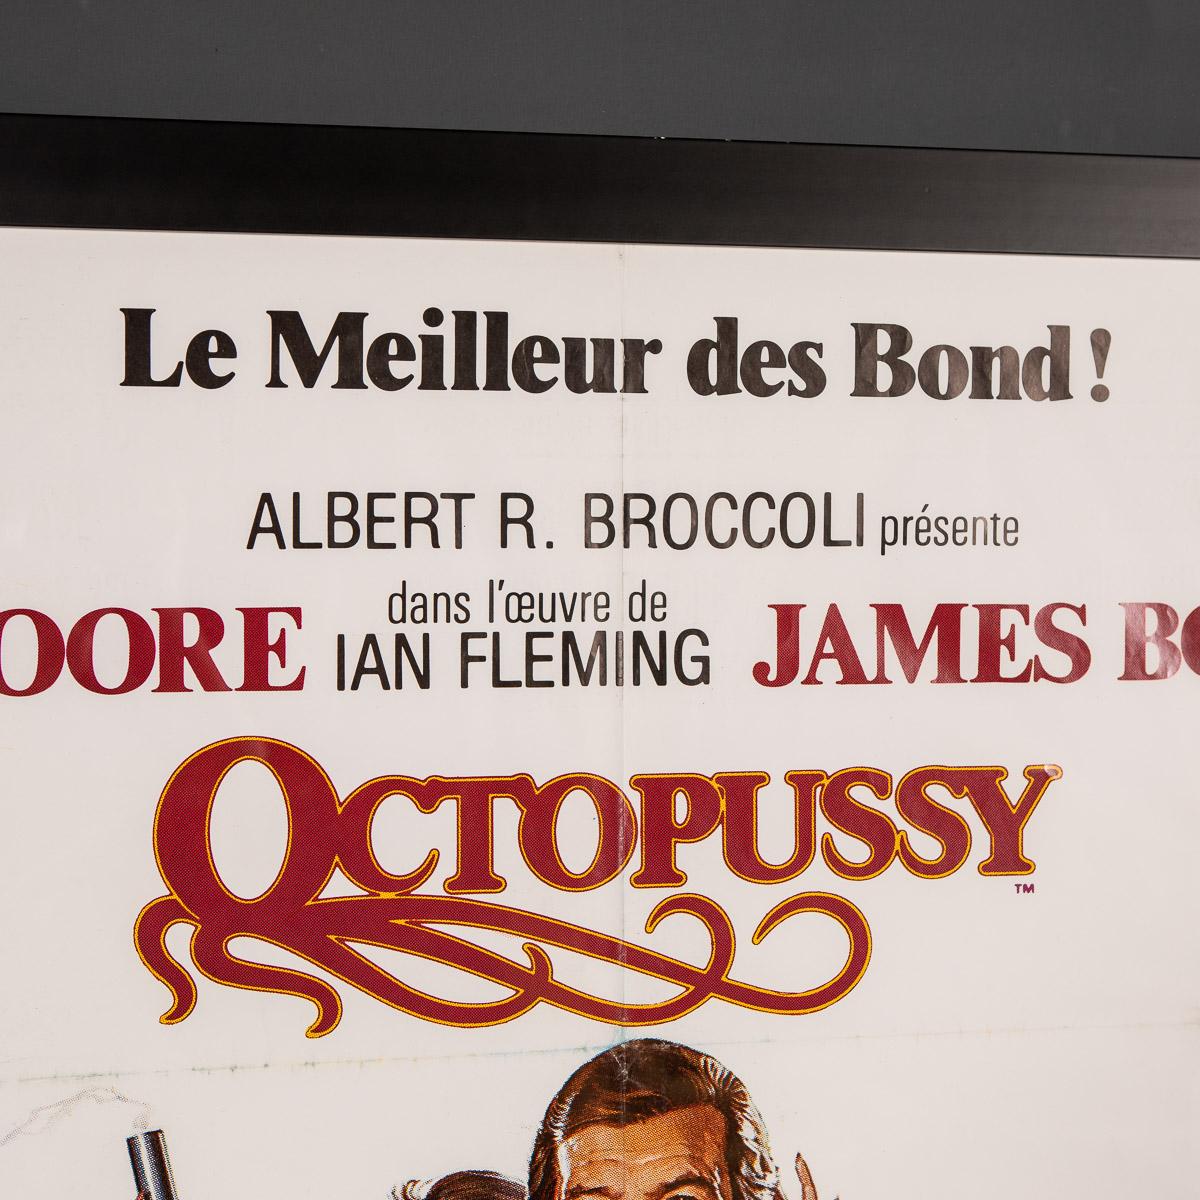 A very rare and original French 'Grande' release poster from the 1983 'Octopussy'. A 1983 spy film and the thirteenth in the James Bond series produced by Eon Productions; it was the sixth to star Roger Moore as the fictional MI6 agent James Bond.